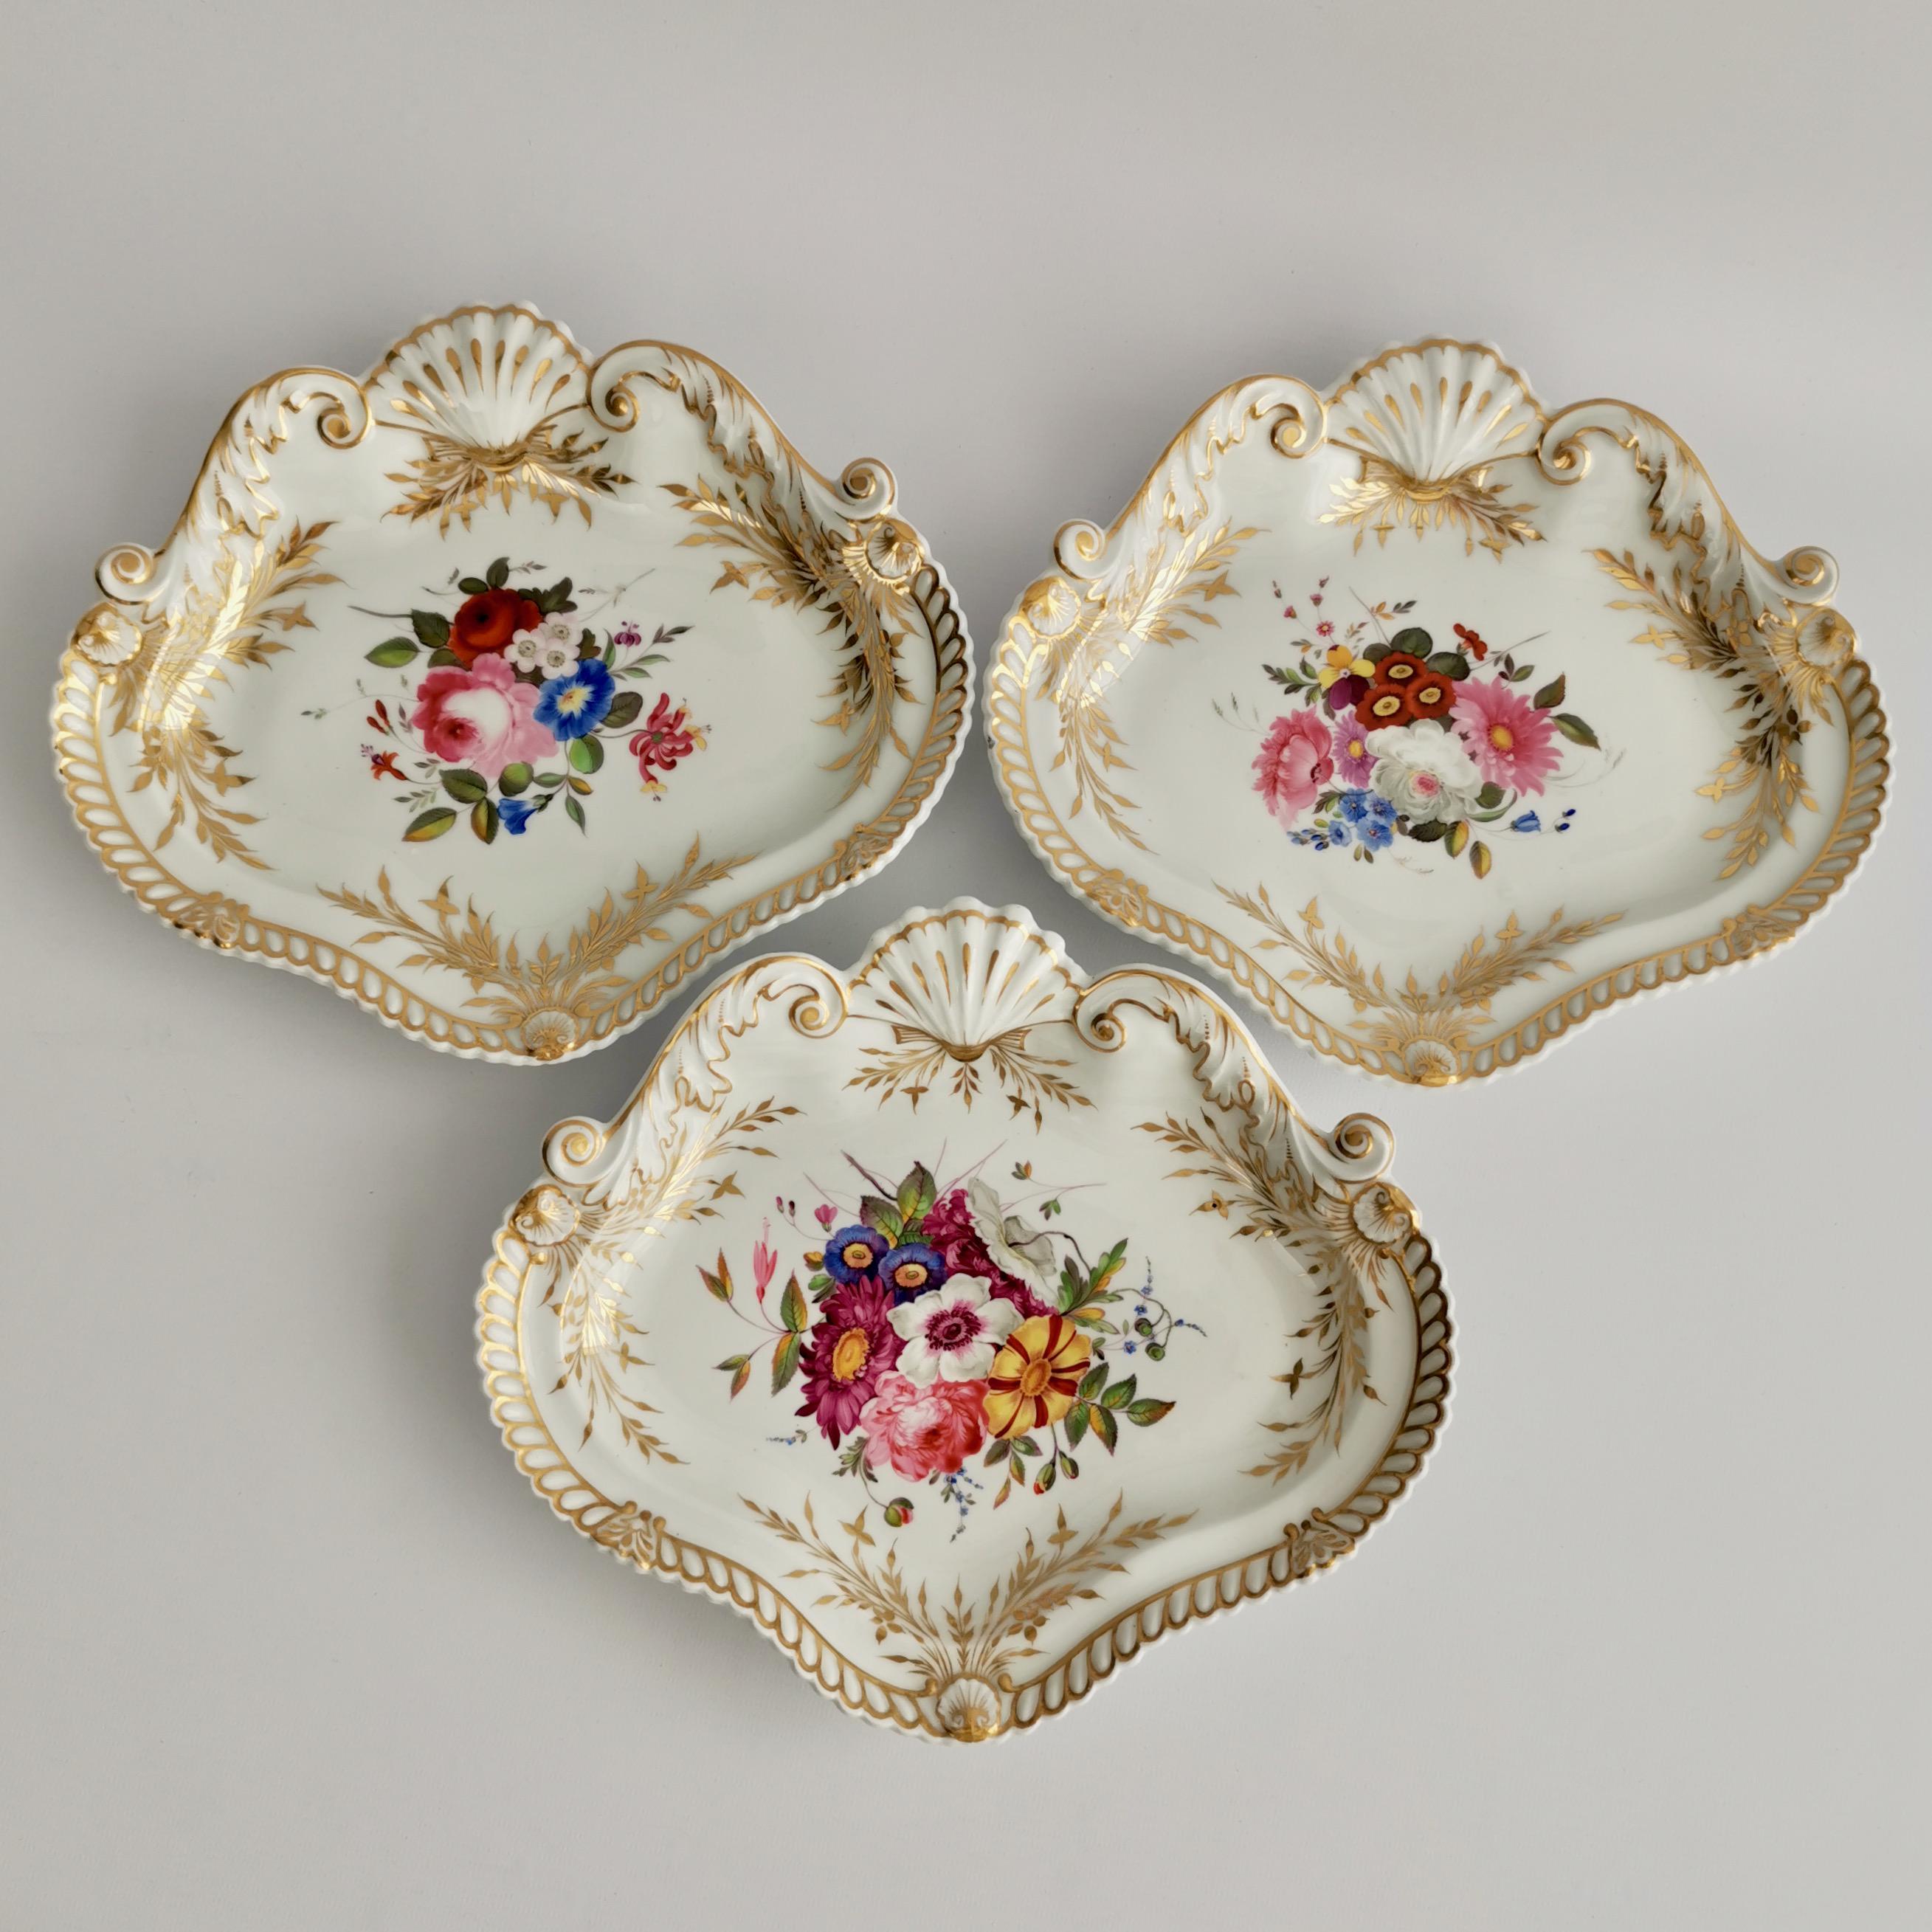 Porcelain Chamberlains Worcester Dessert Service, White with Flowers, Regency, ca 1822 For Sale